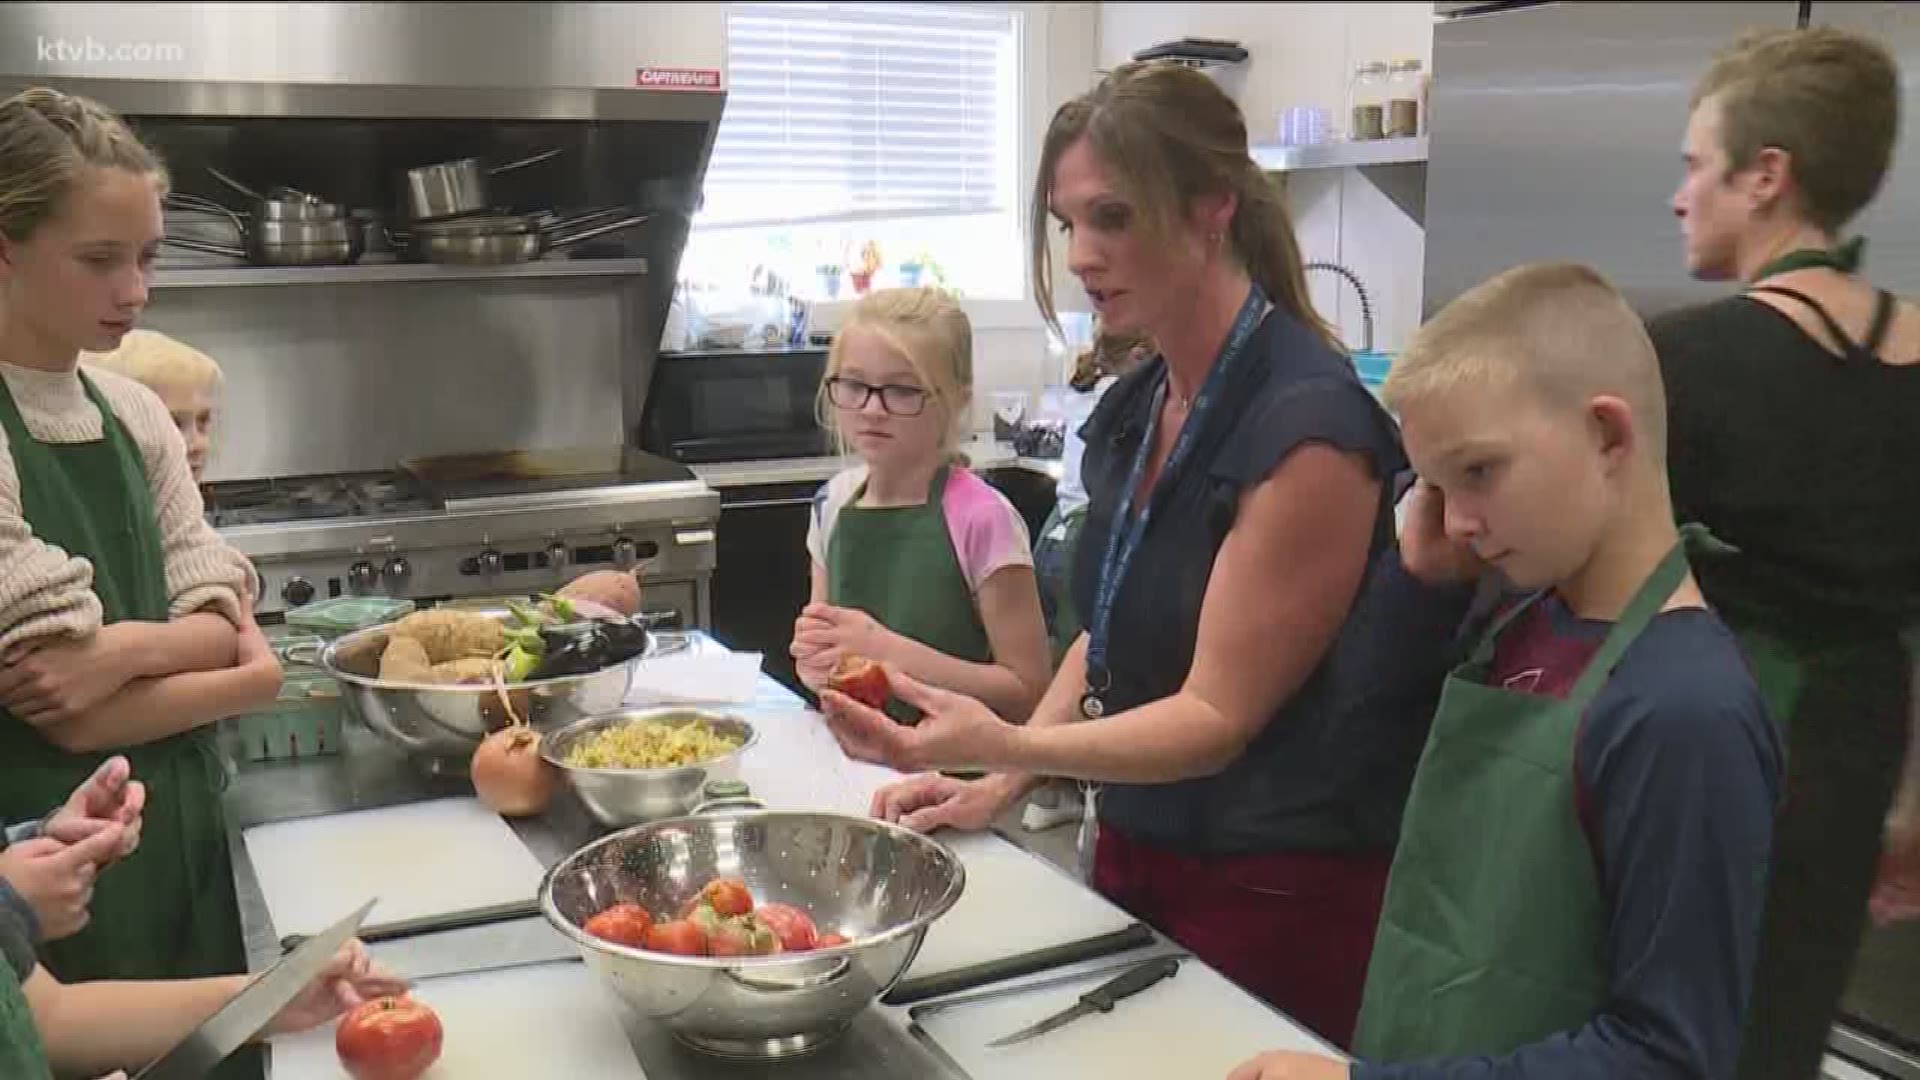 "BUGS" is a place where children can go to get a real-life experience. Pohley Richey teaches cooking classes to the kids.